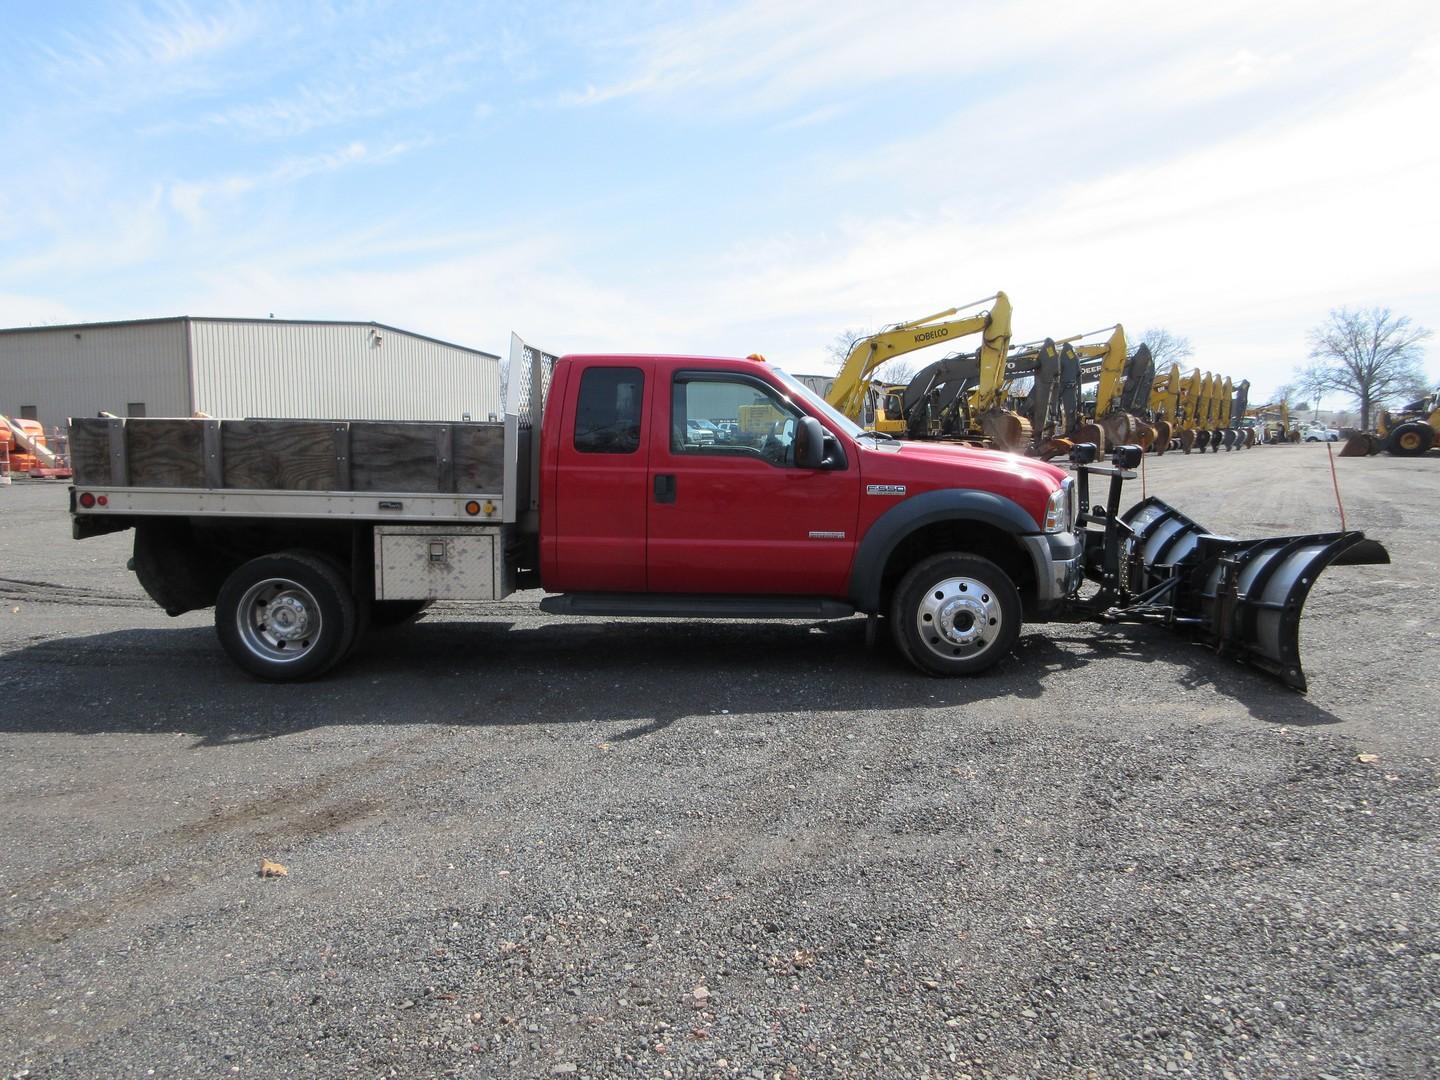 2007 Ford F-550 XLT S/A Flatbed Dump Truck